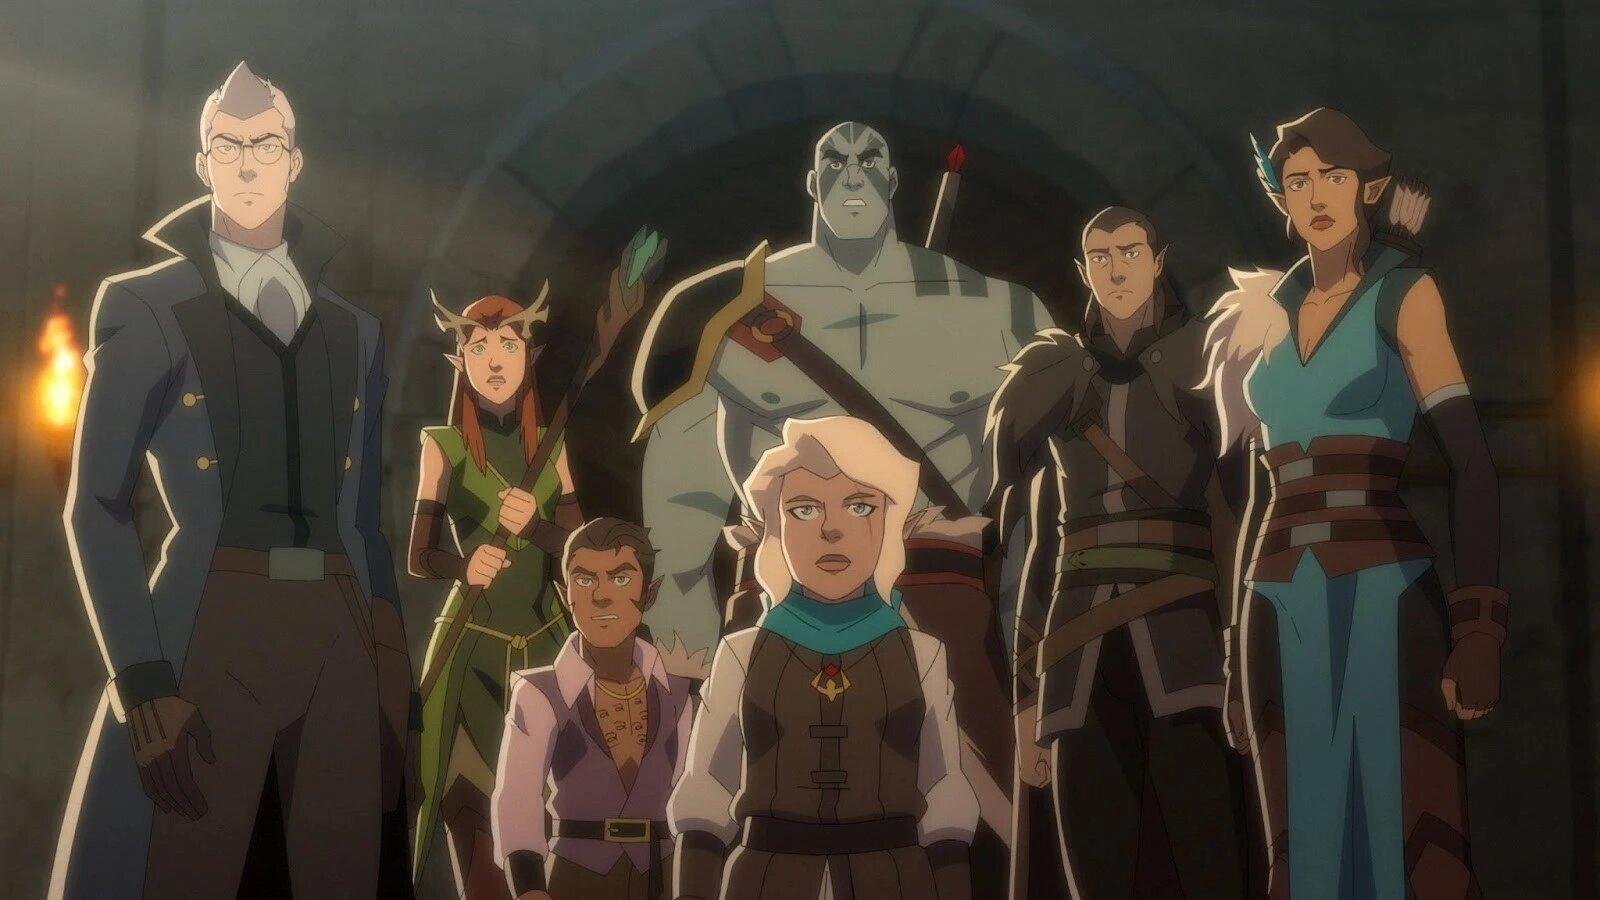 A still from The Legend of Vox Machina Season 2